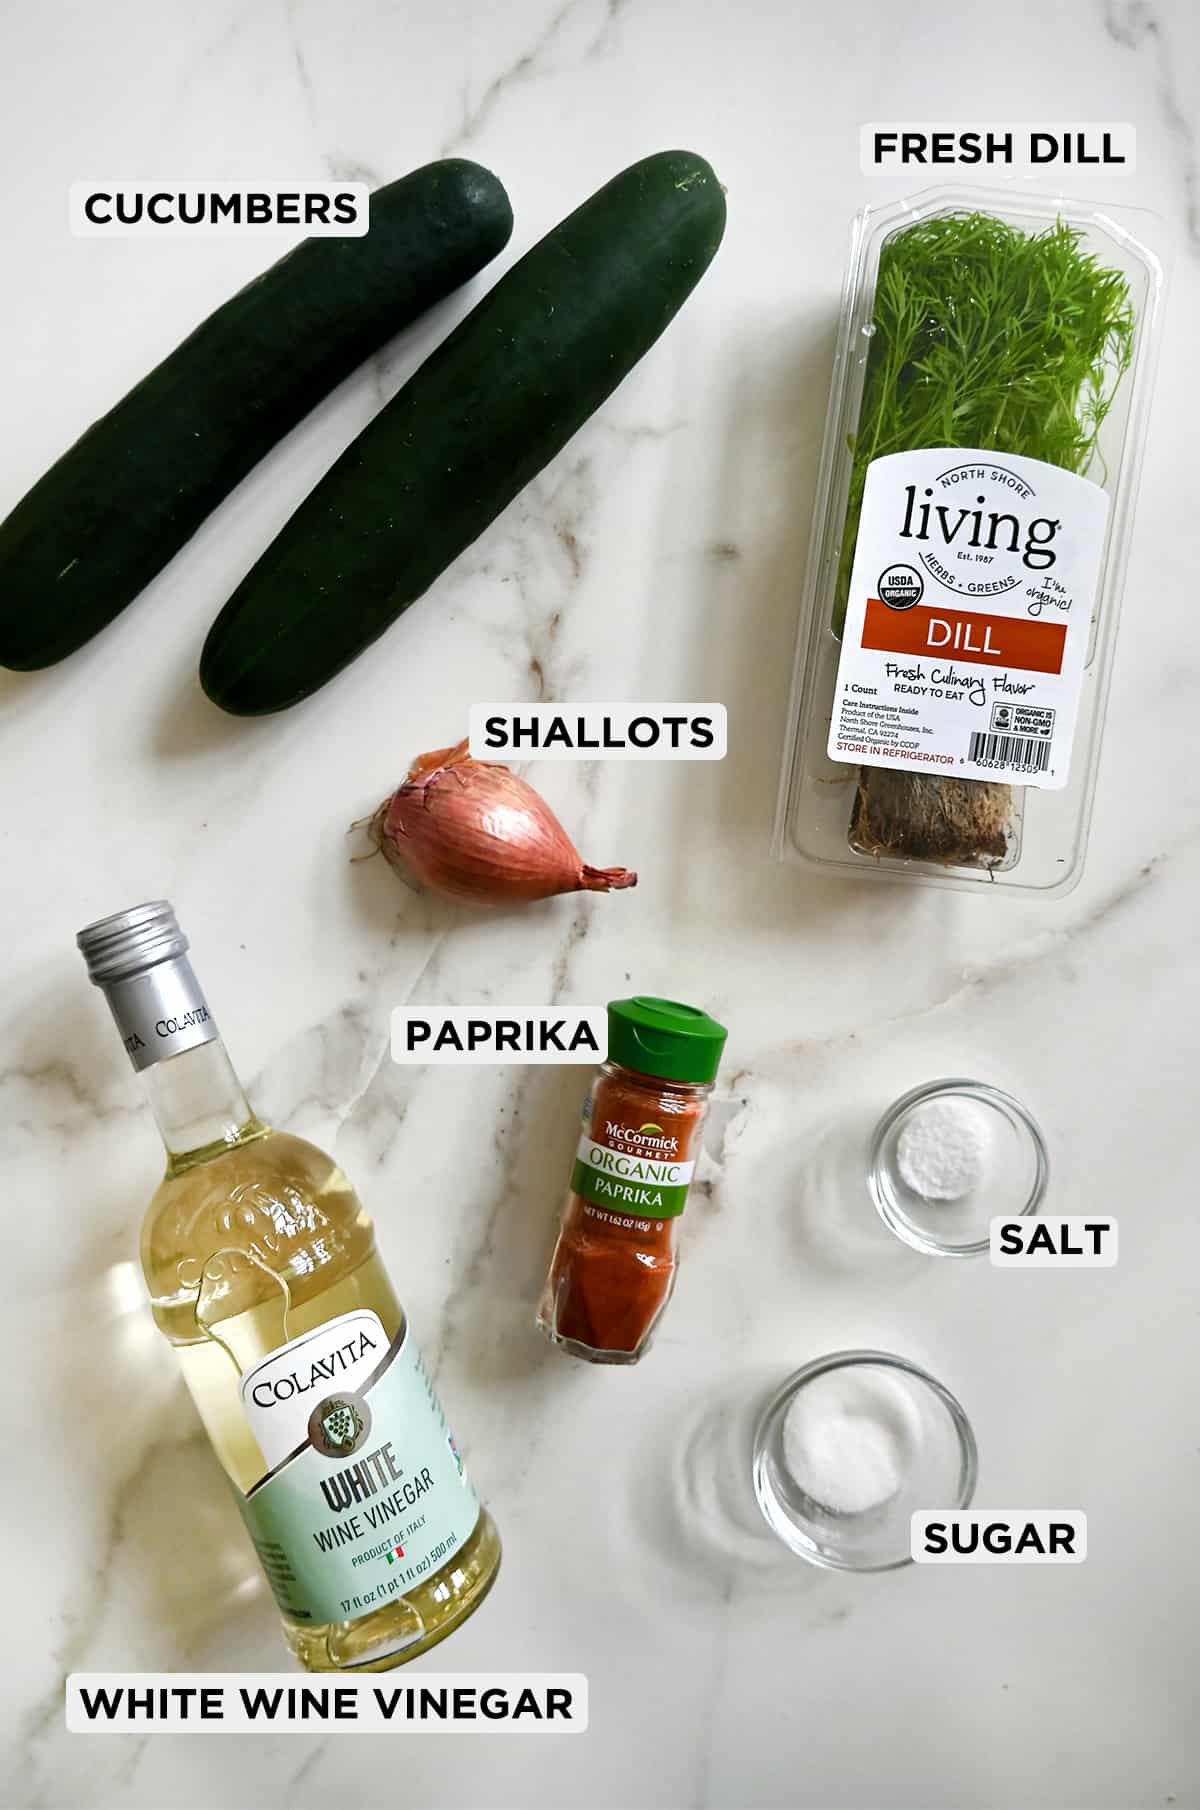 A labeled photo of ingredients for cucumber salad, including white wine vinegar, cucumbers, shallots, fresh dill, paprika, salt and sugar.